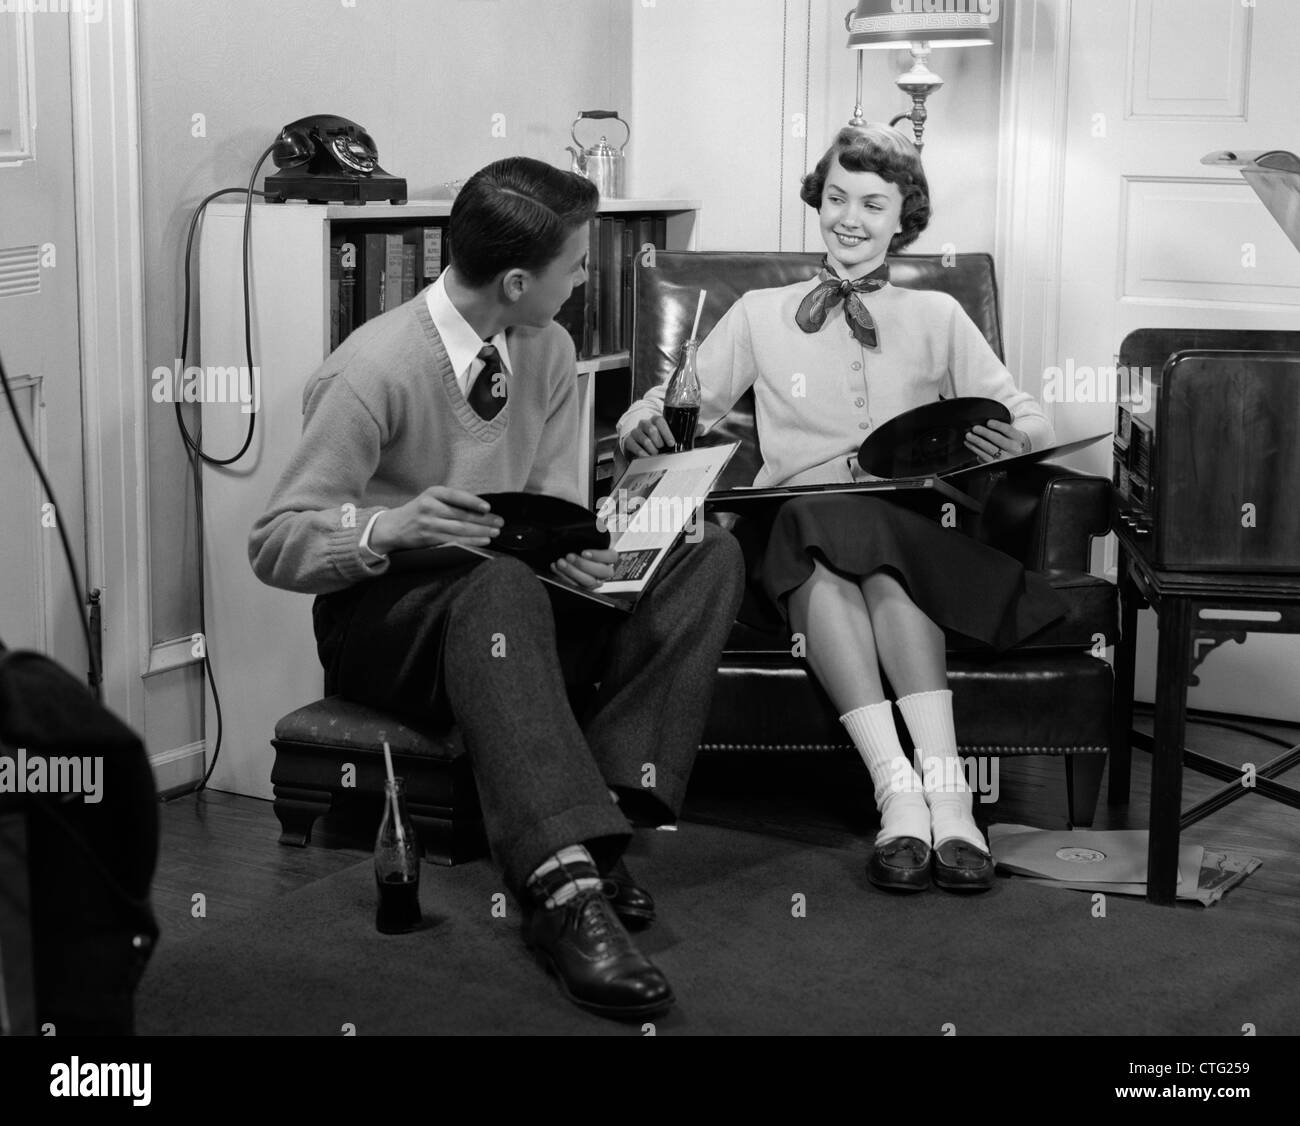 1950s TEEN BOY & GIRL SITTING IN LIVING ROOM DRINKING SODA & LISTENING TO RECORDS Stock Photo